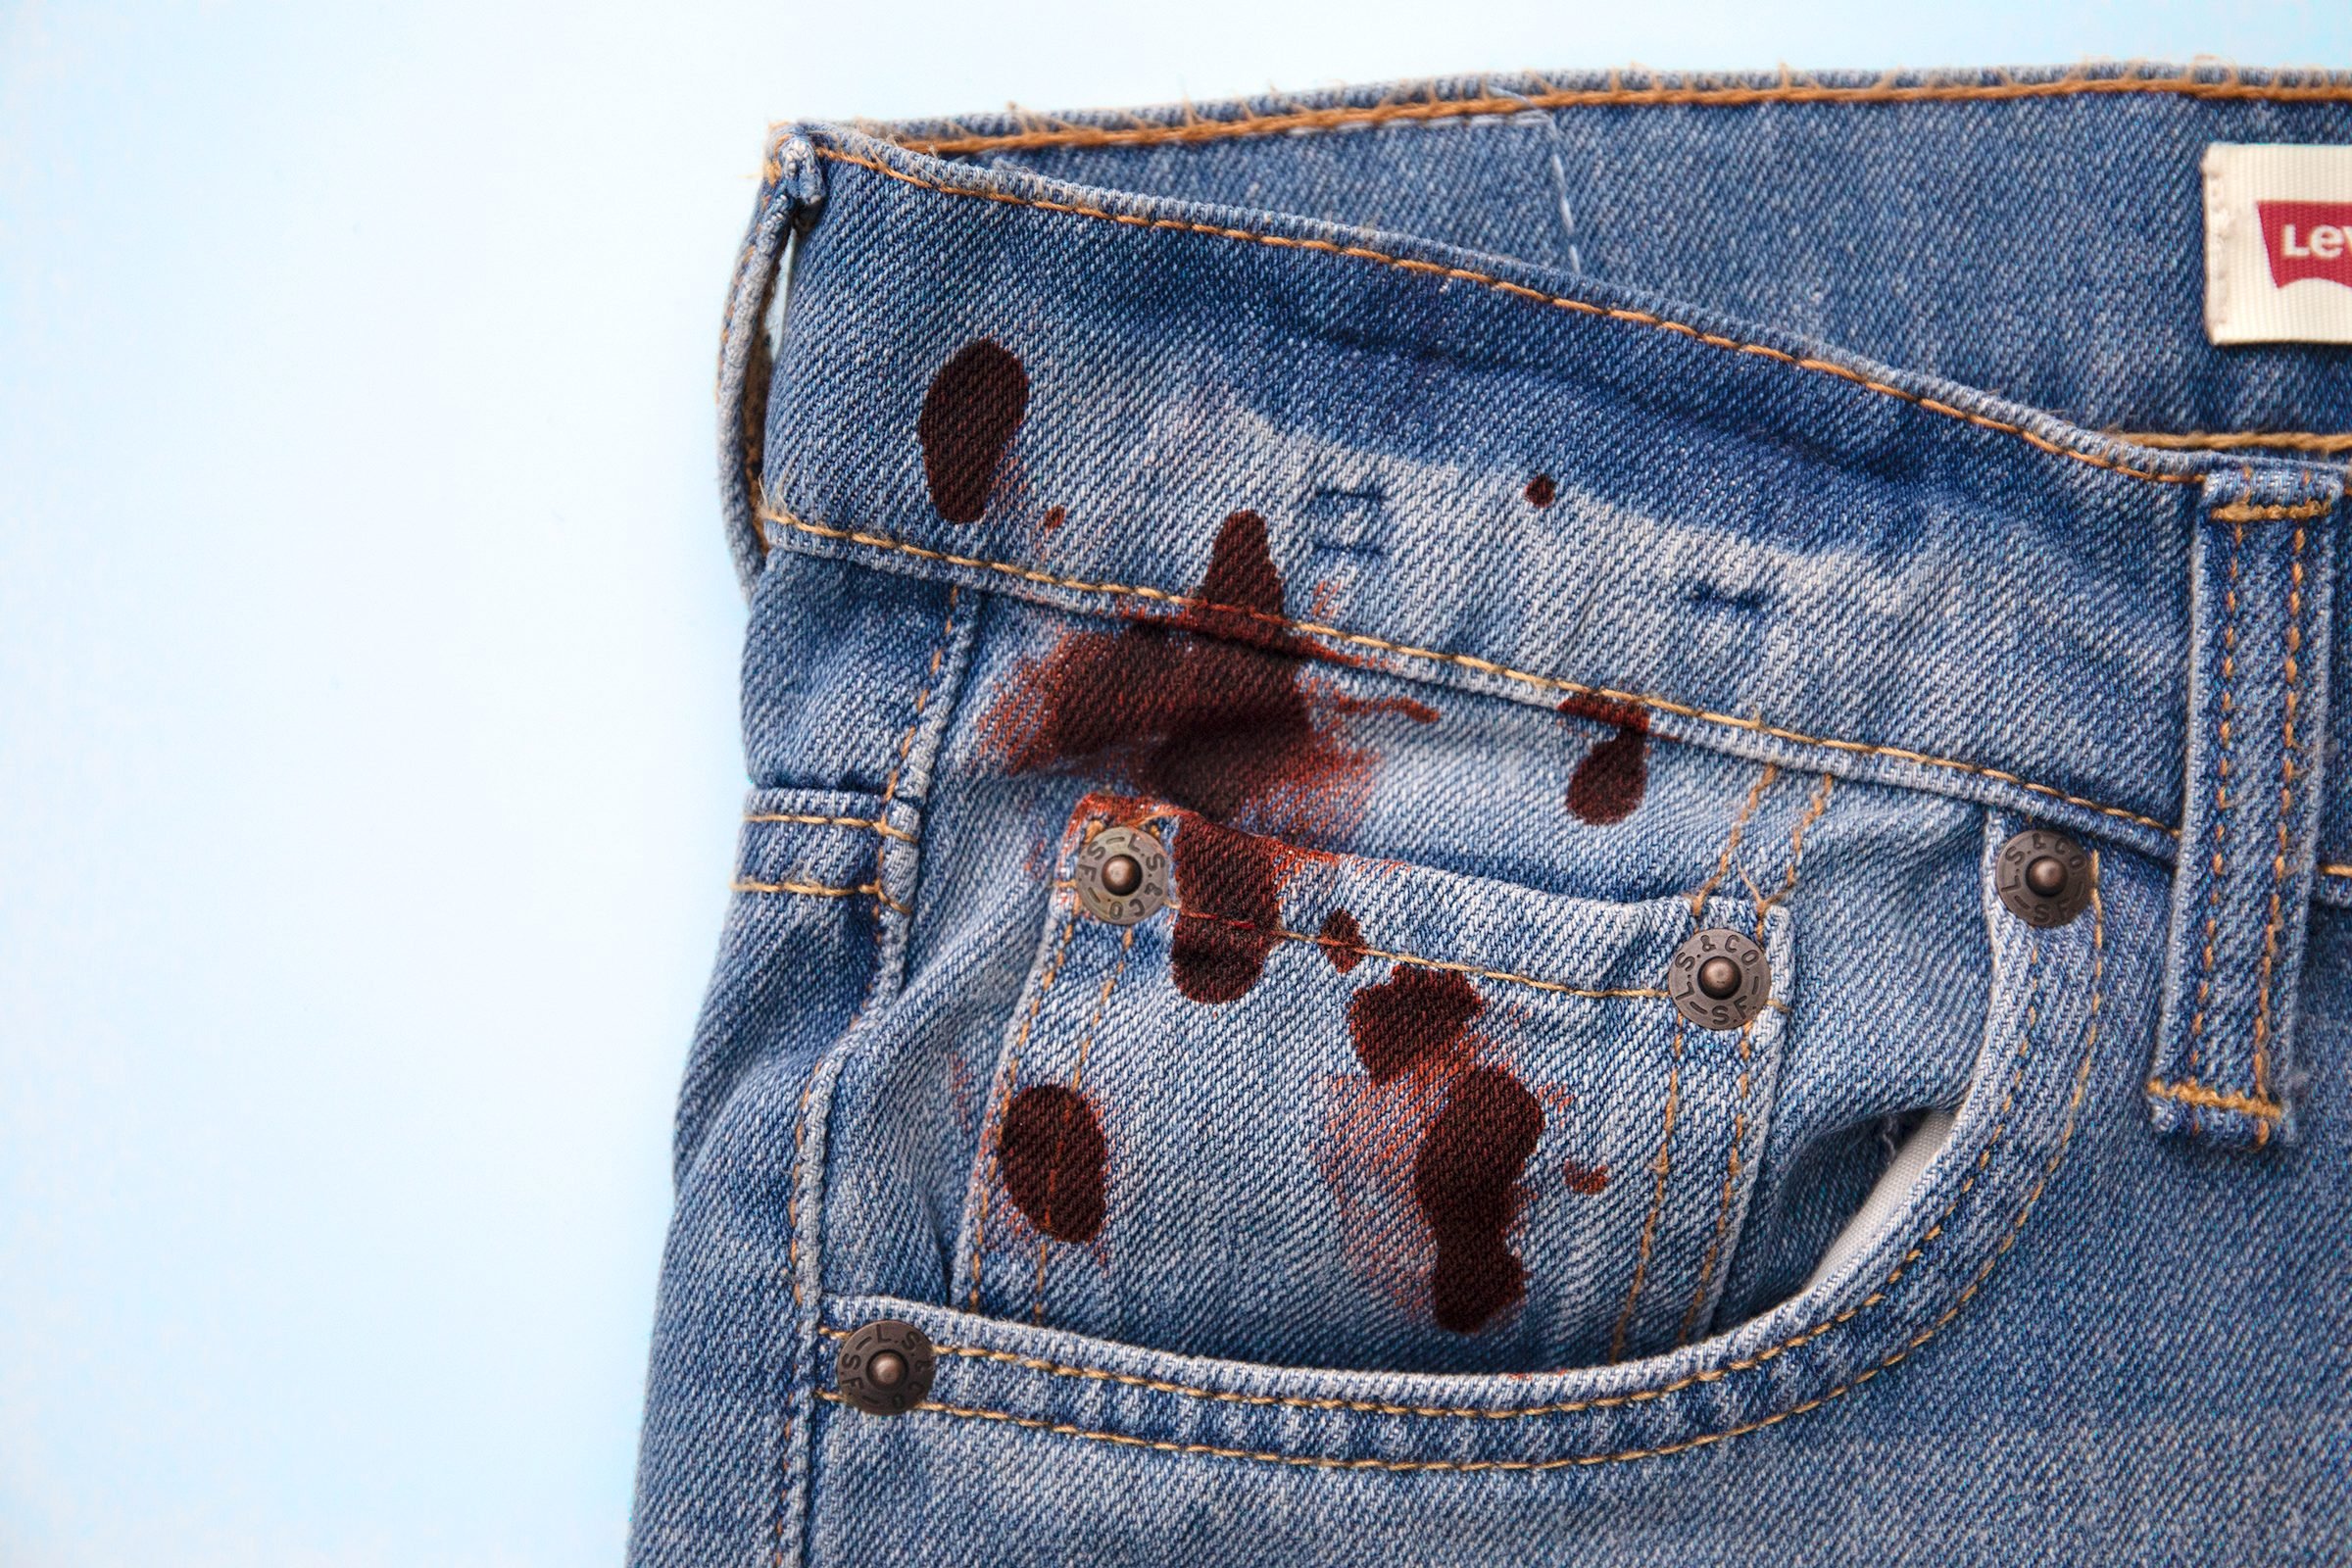 How to get stains out of clothes – blood, ink, oil & more